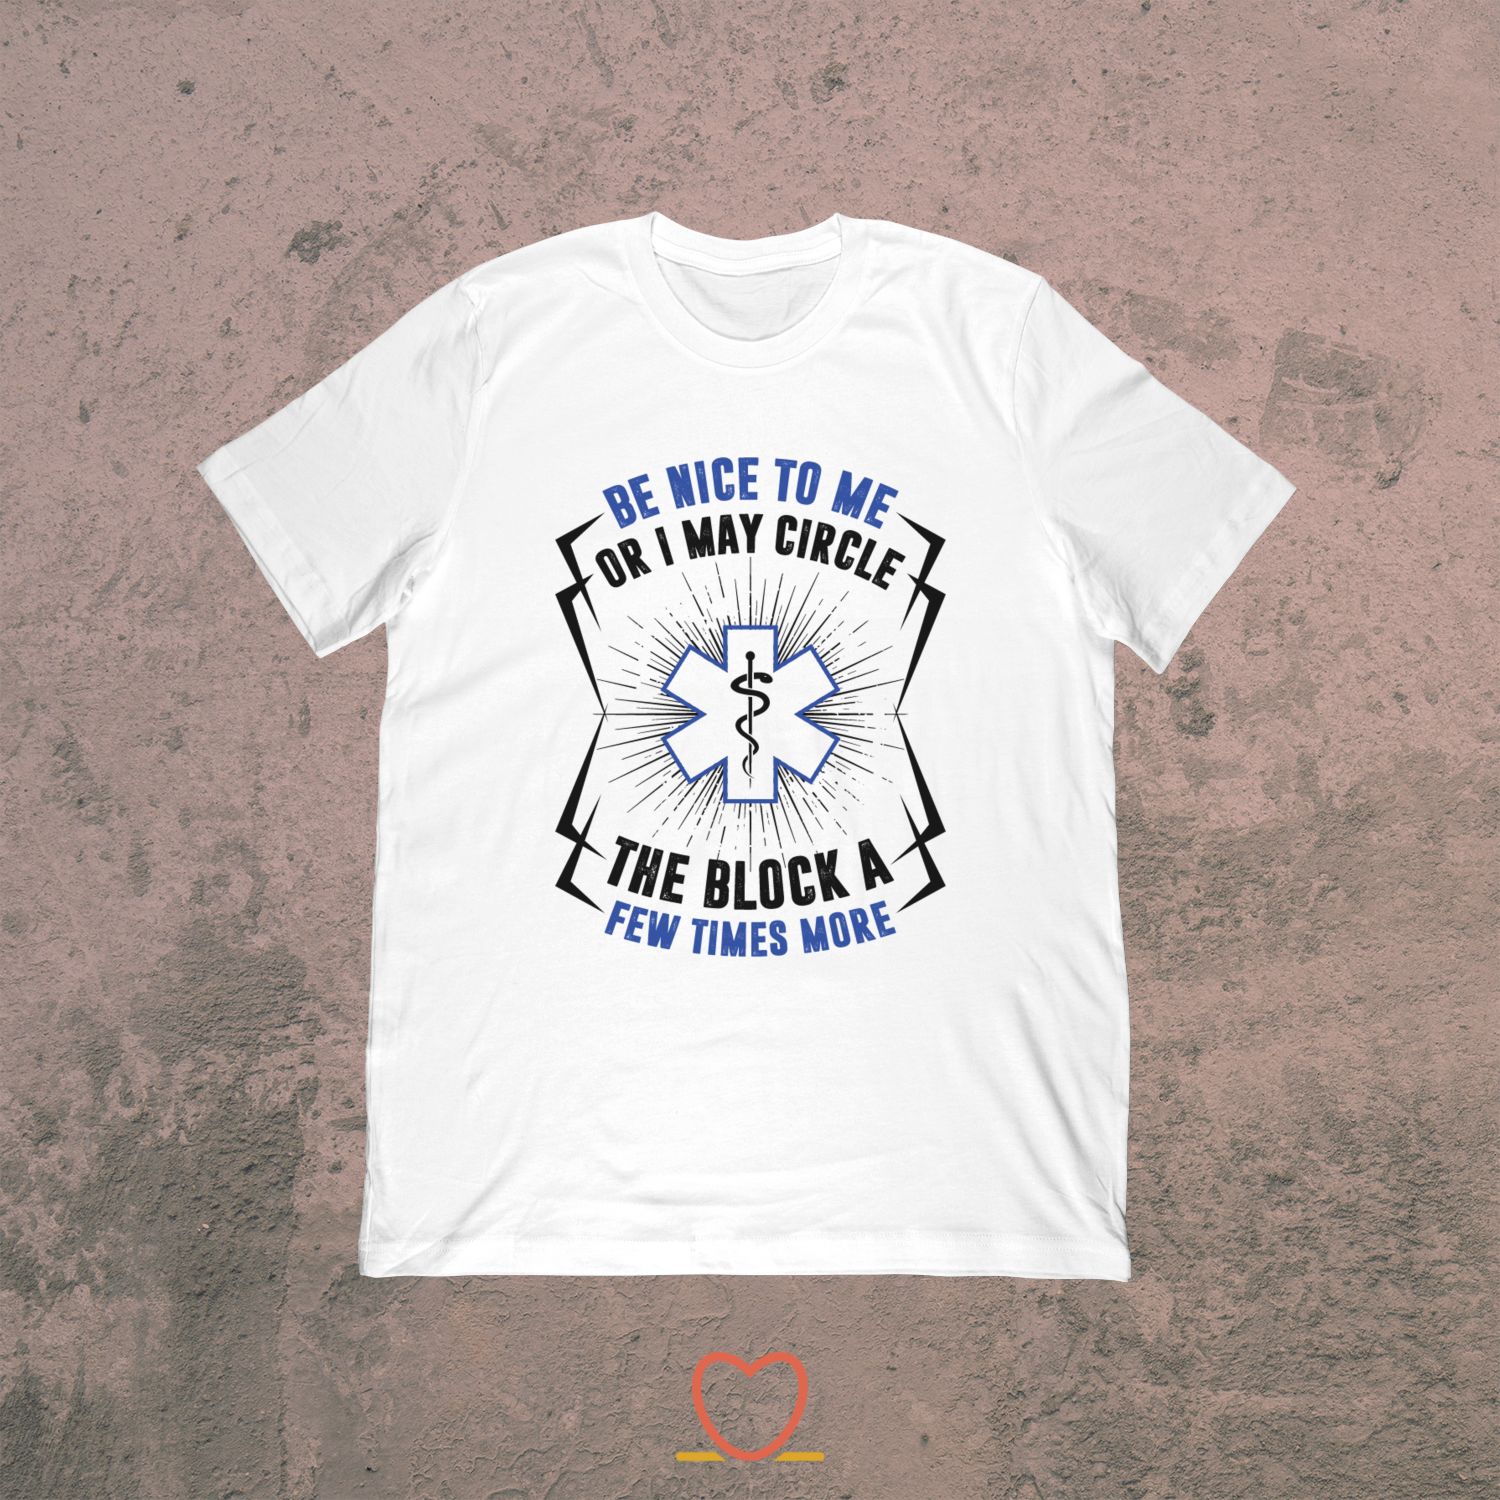 Be Nice To Me Or I May Circle The Block – Funny Medical Tee